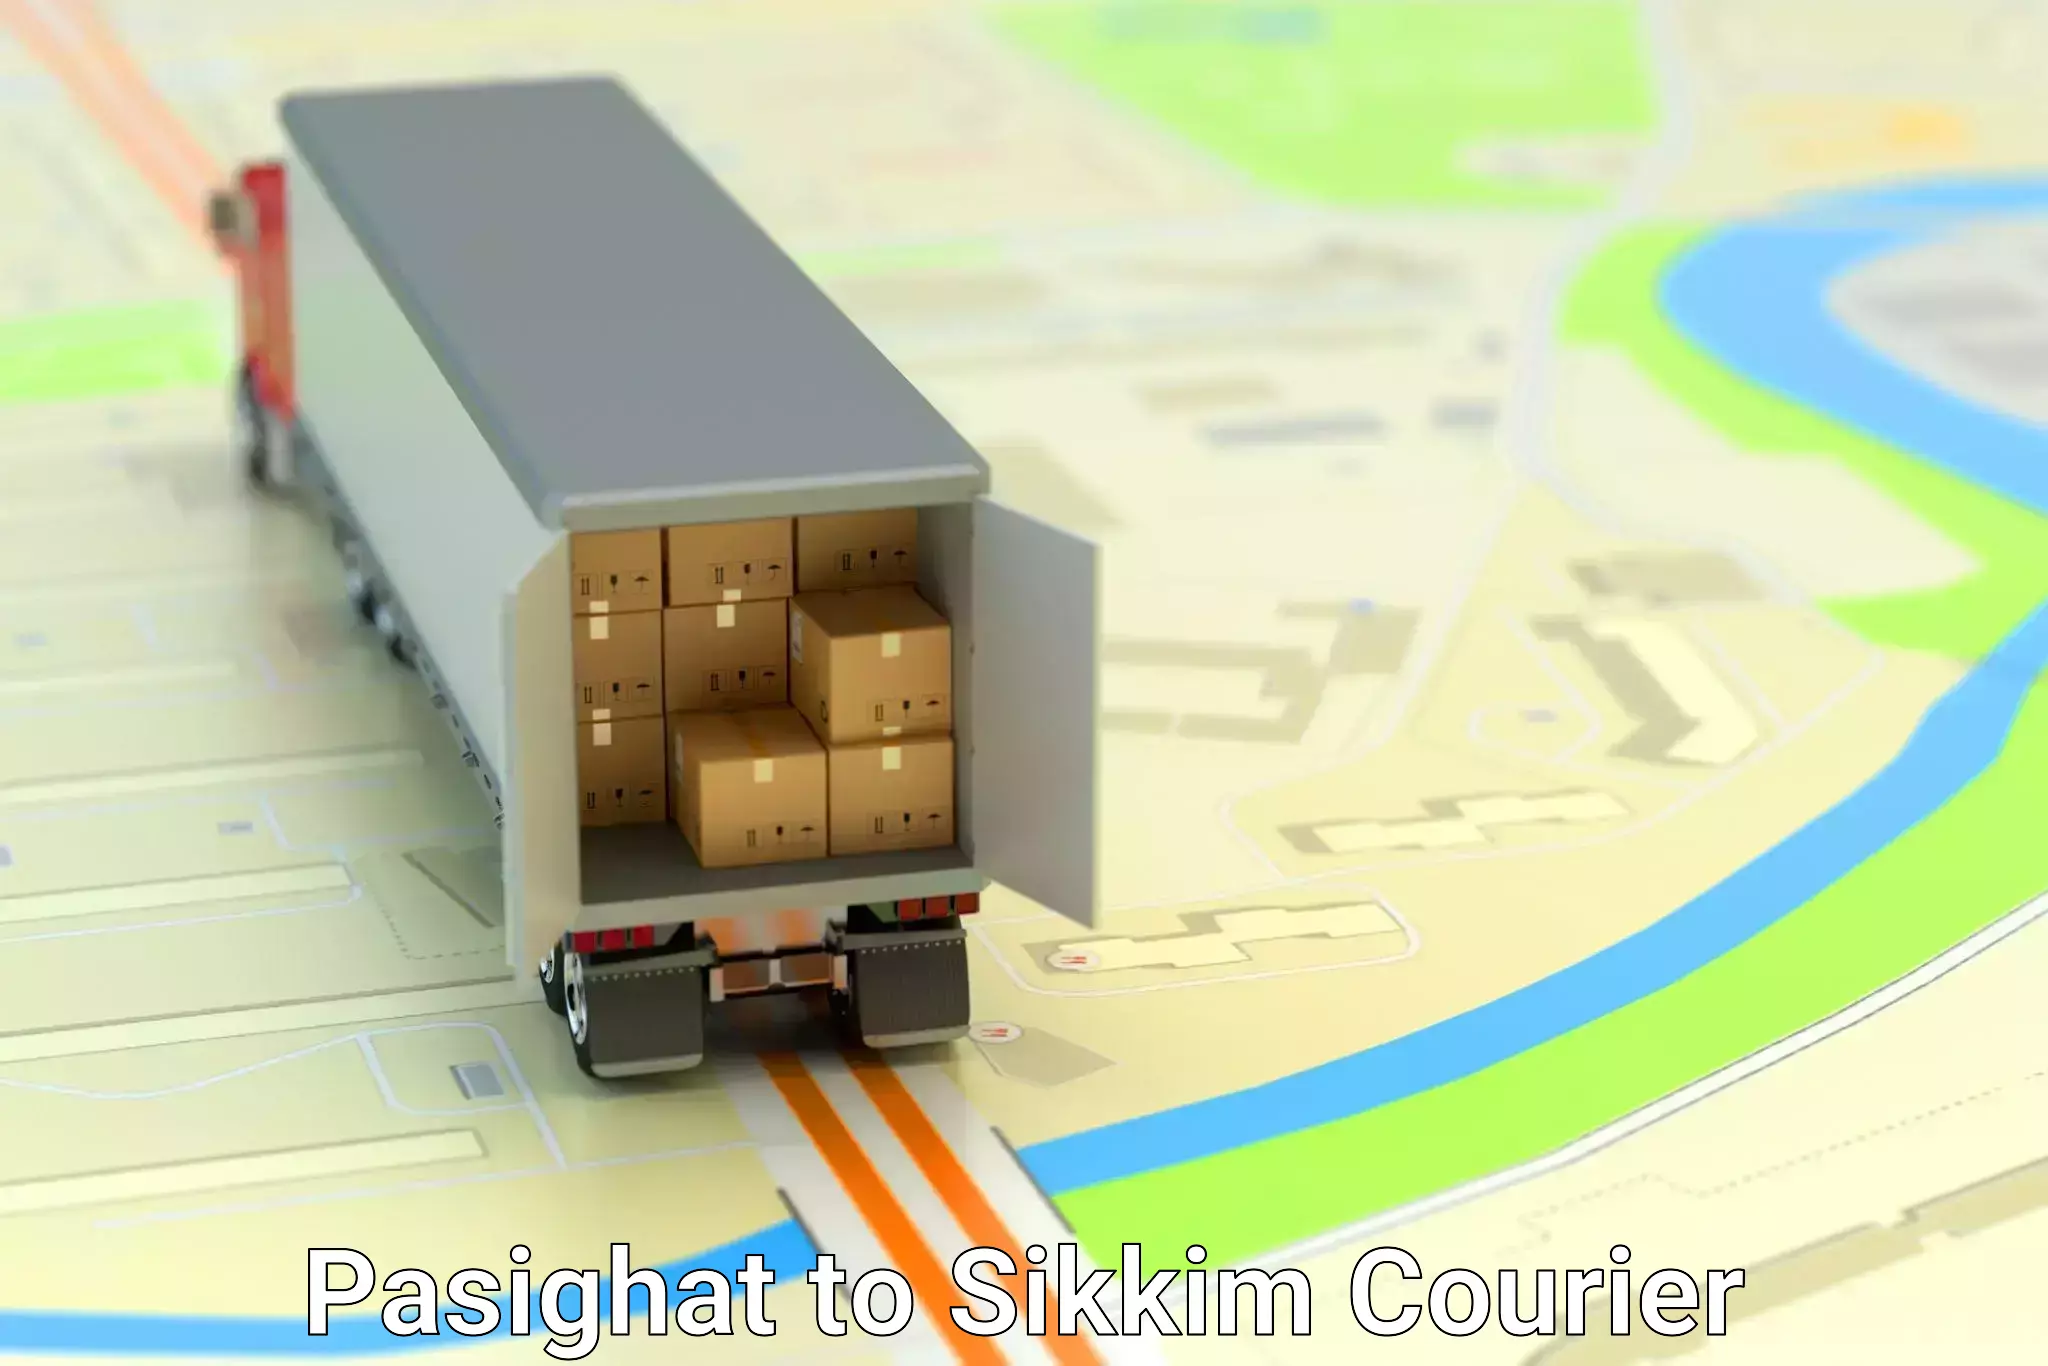 Supply chain efficiency Pasighat to Sikkim